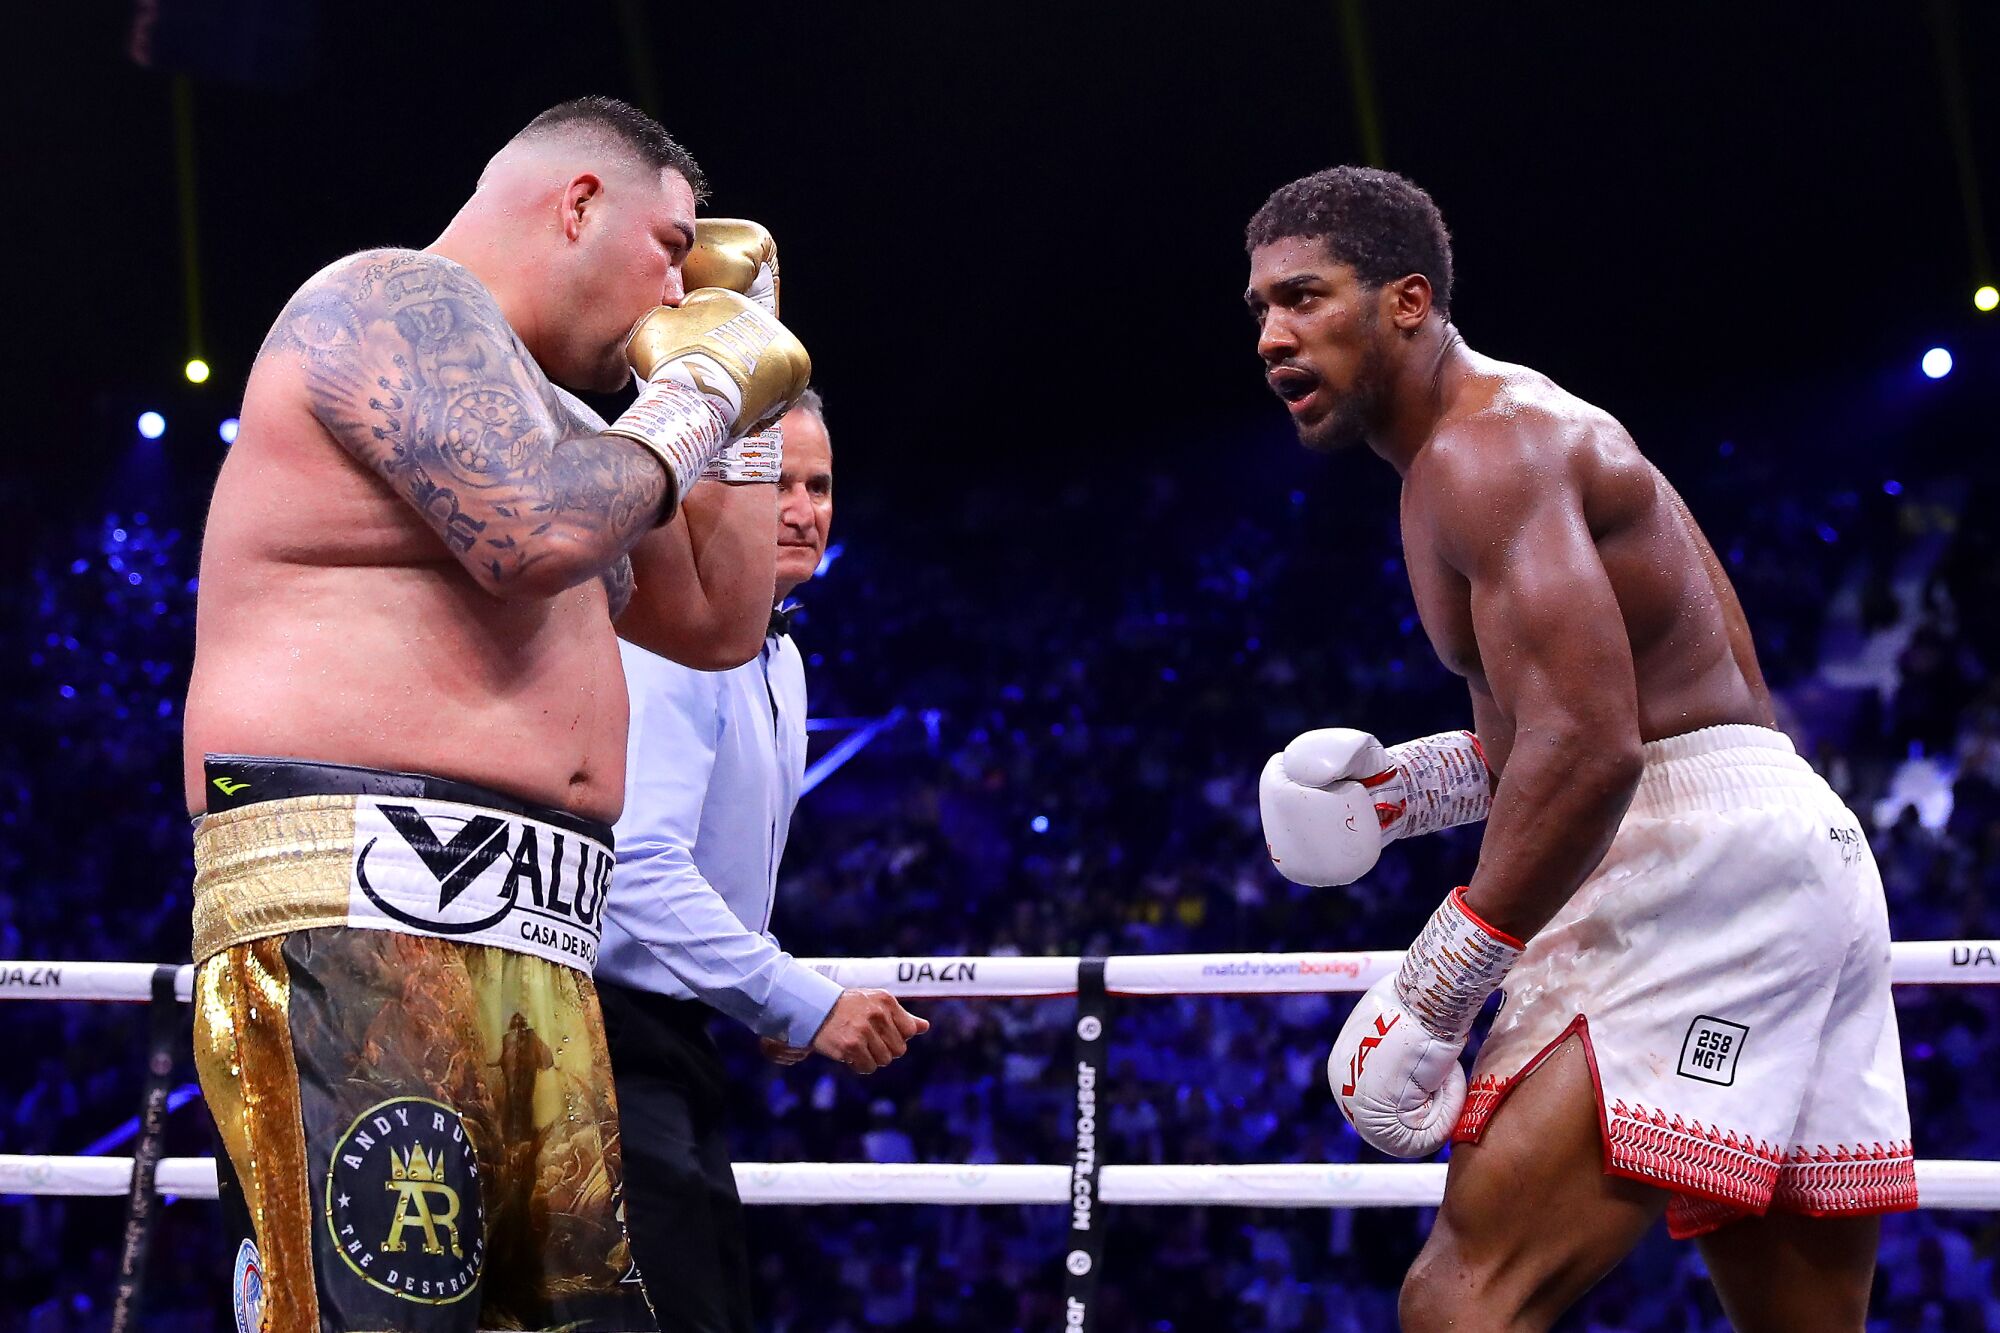 Anthony Joshua, right, taunts Andy Ruiz Jr. during their heavyweight title match Dec. 7, 2019, in Saudi Arabia.